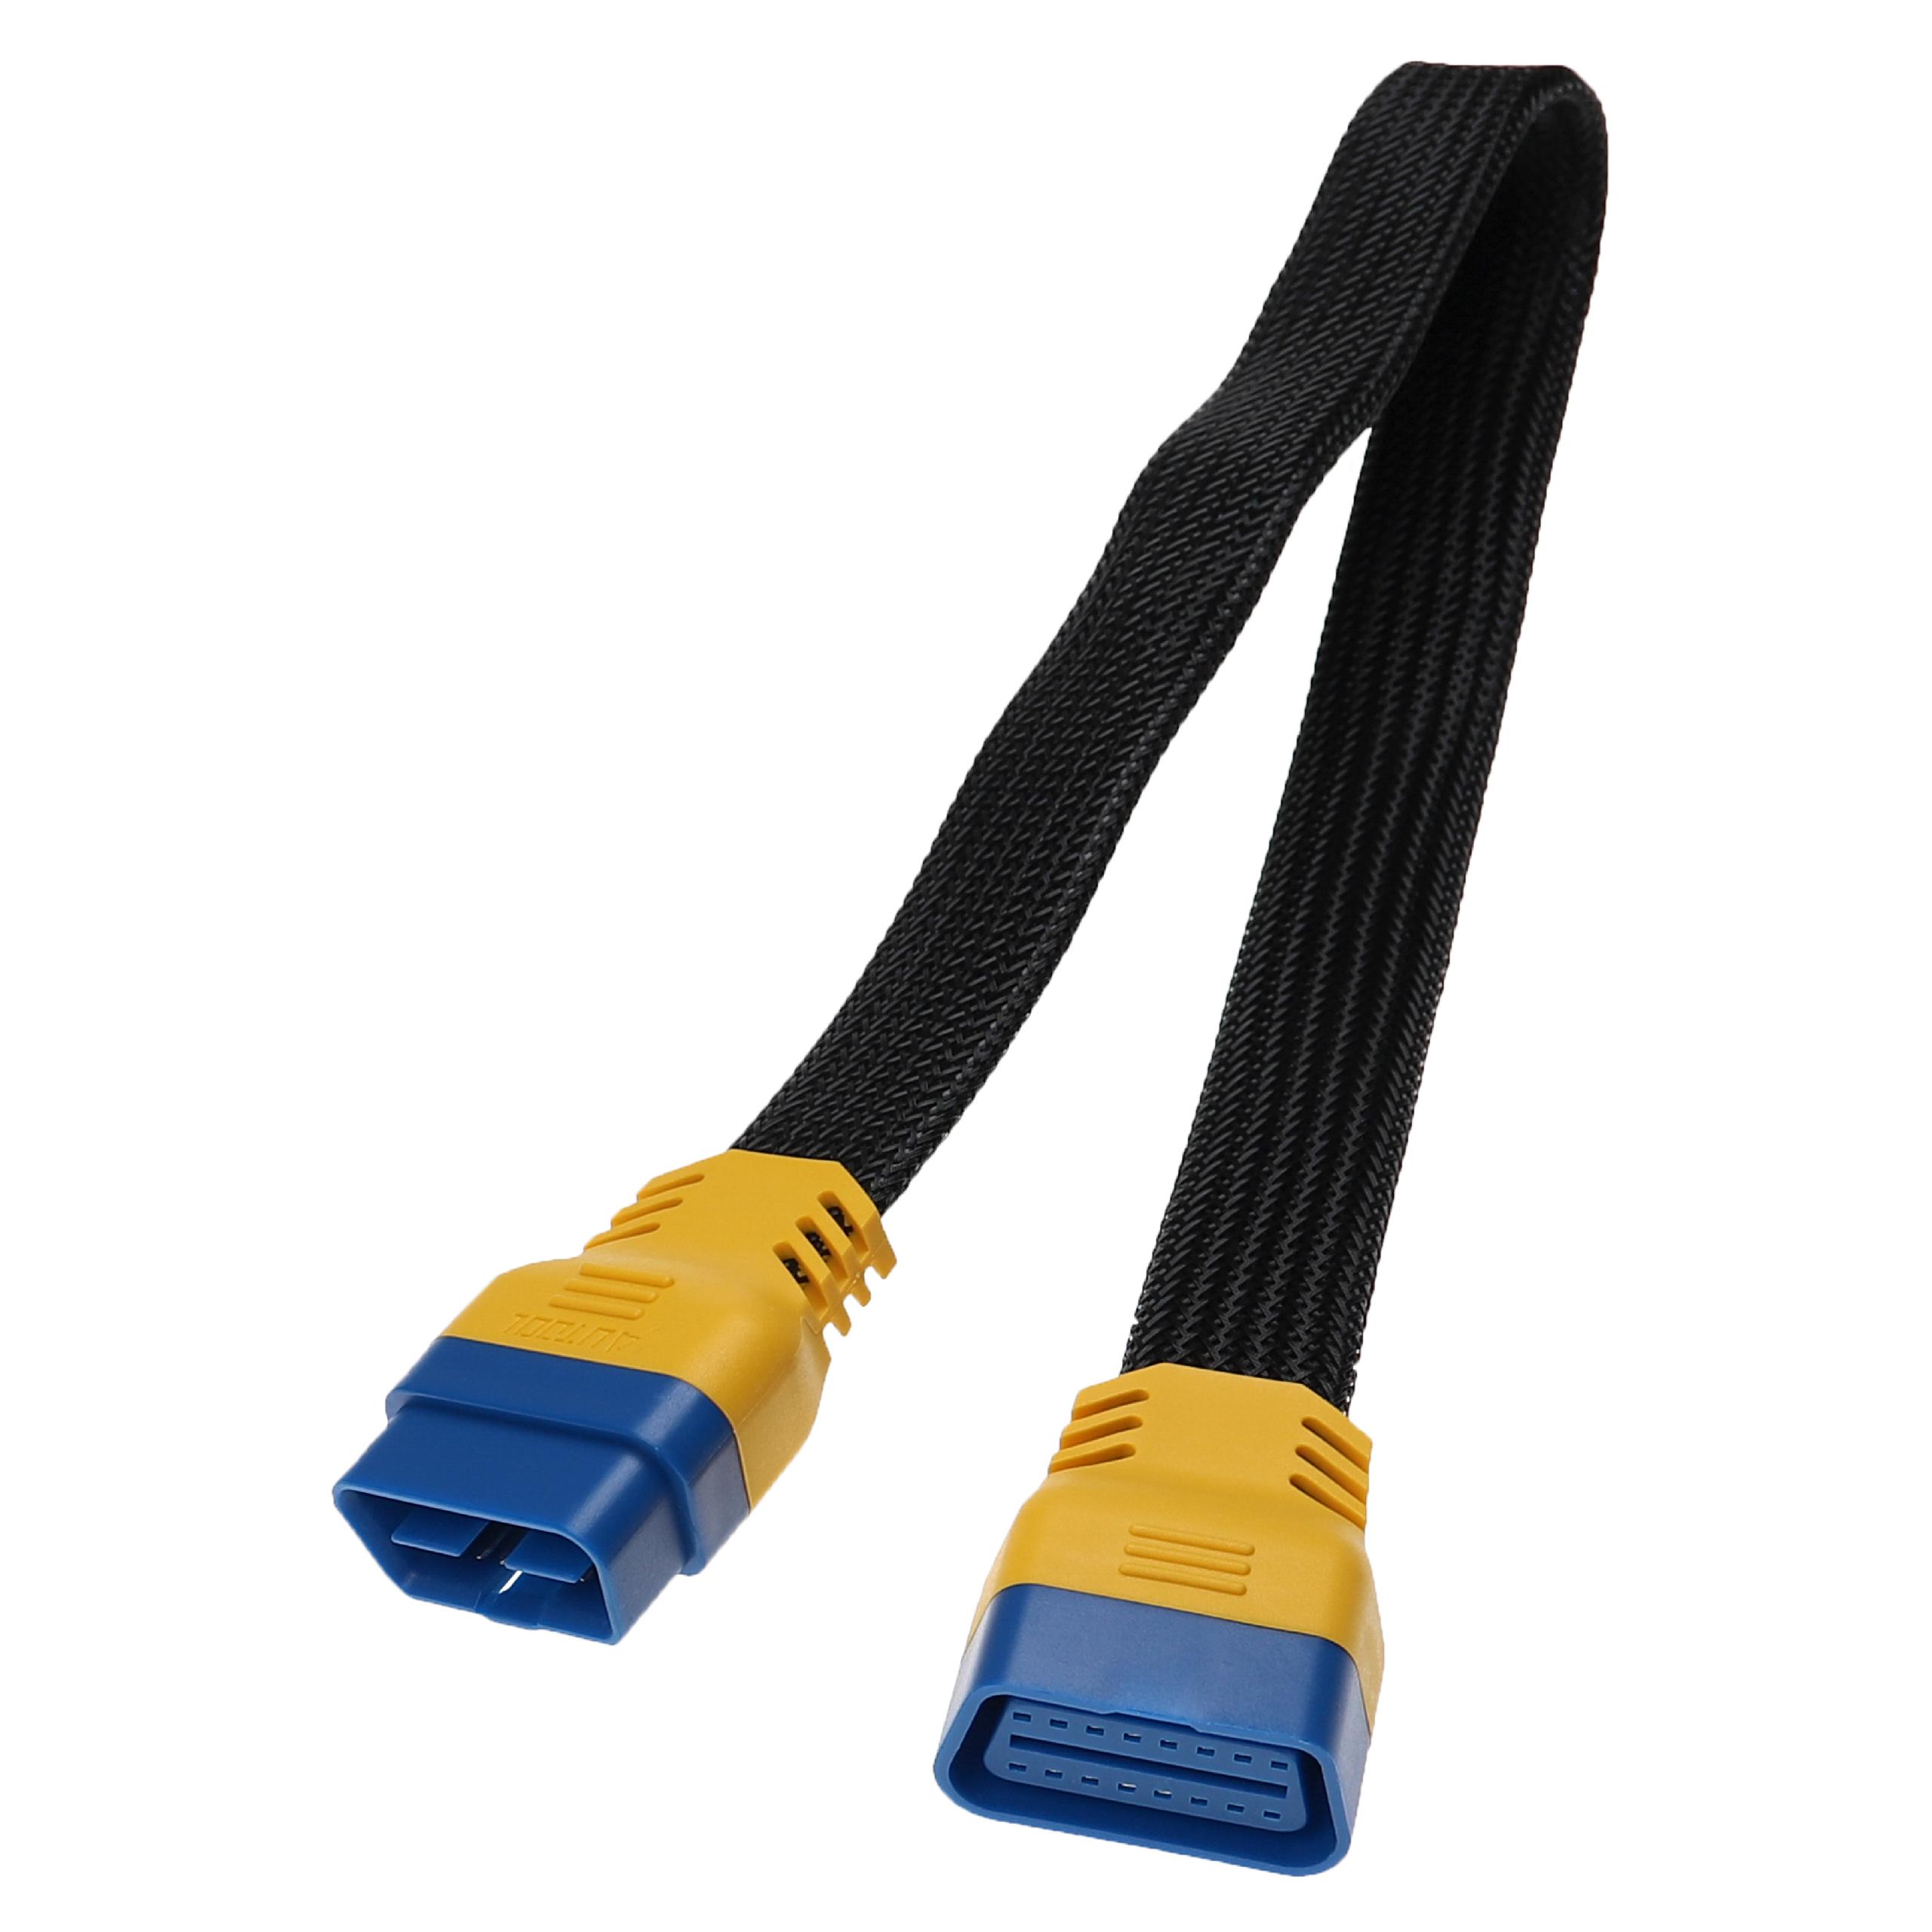 vhbw OBD2 Extension Cable 16 Pin (f) to 16 Pin (m) for LKW, Car, Vehicle - 60 cm